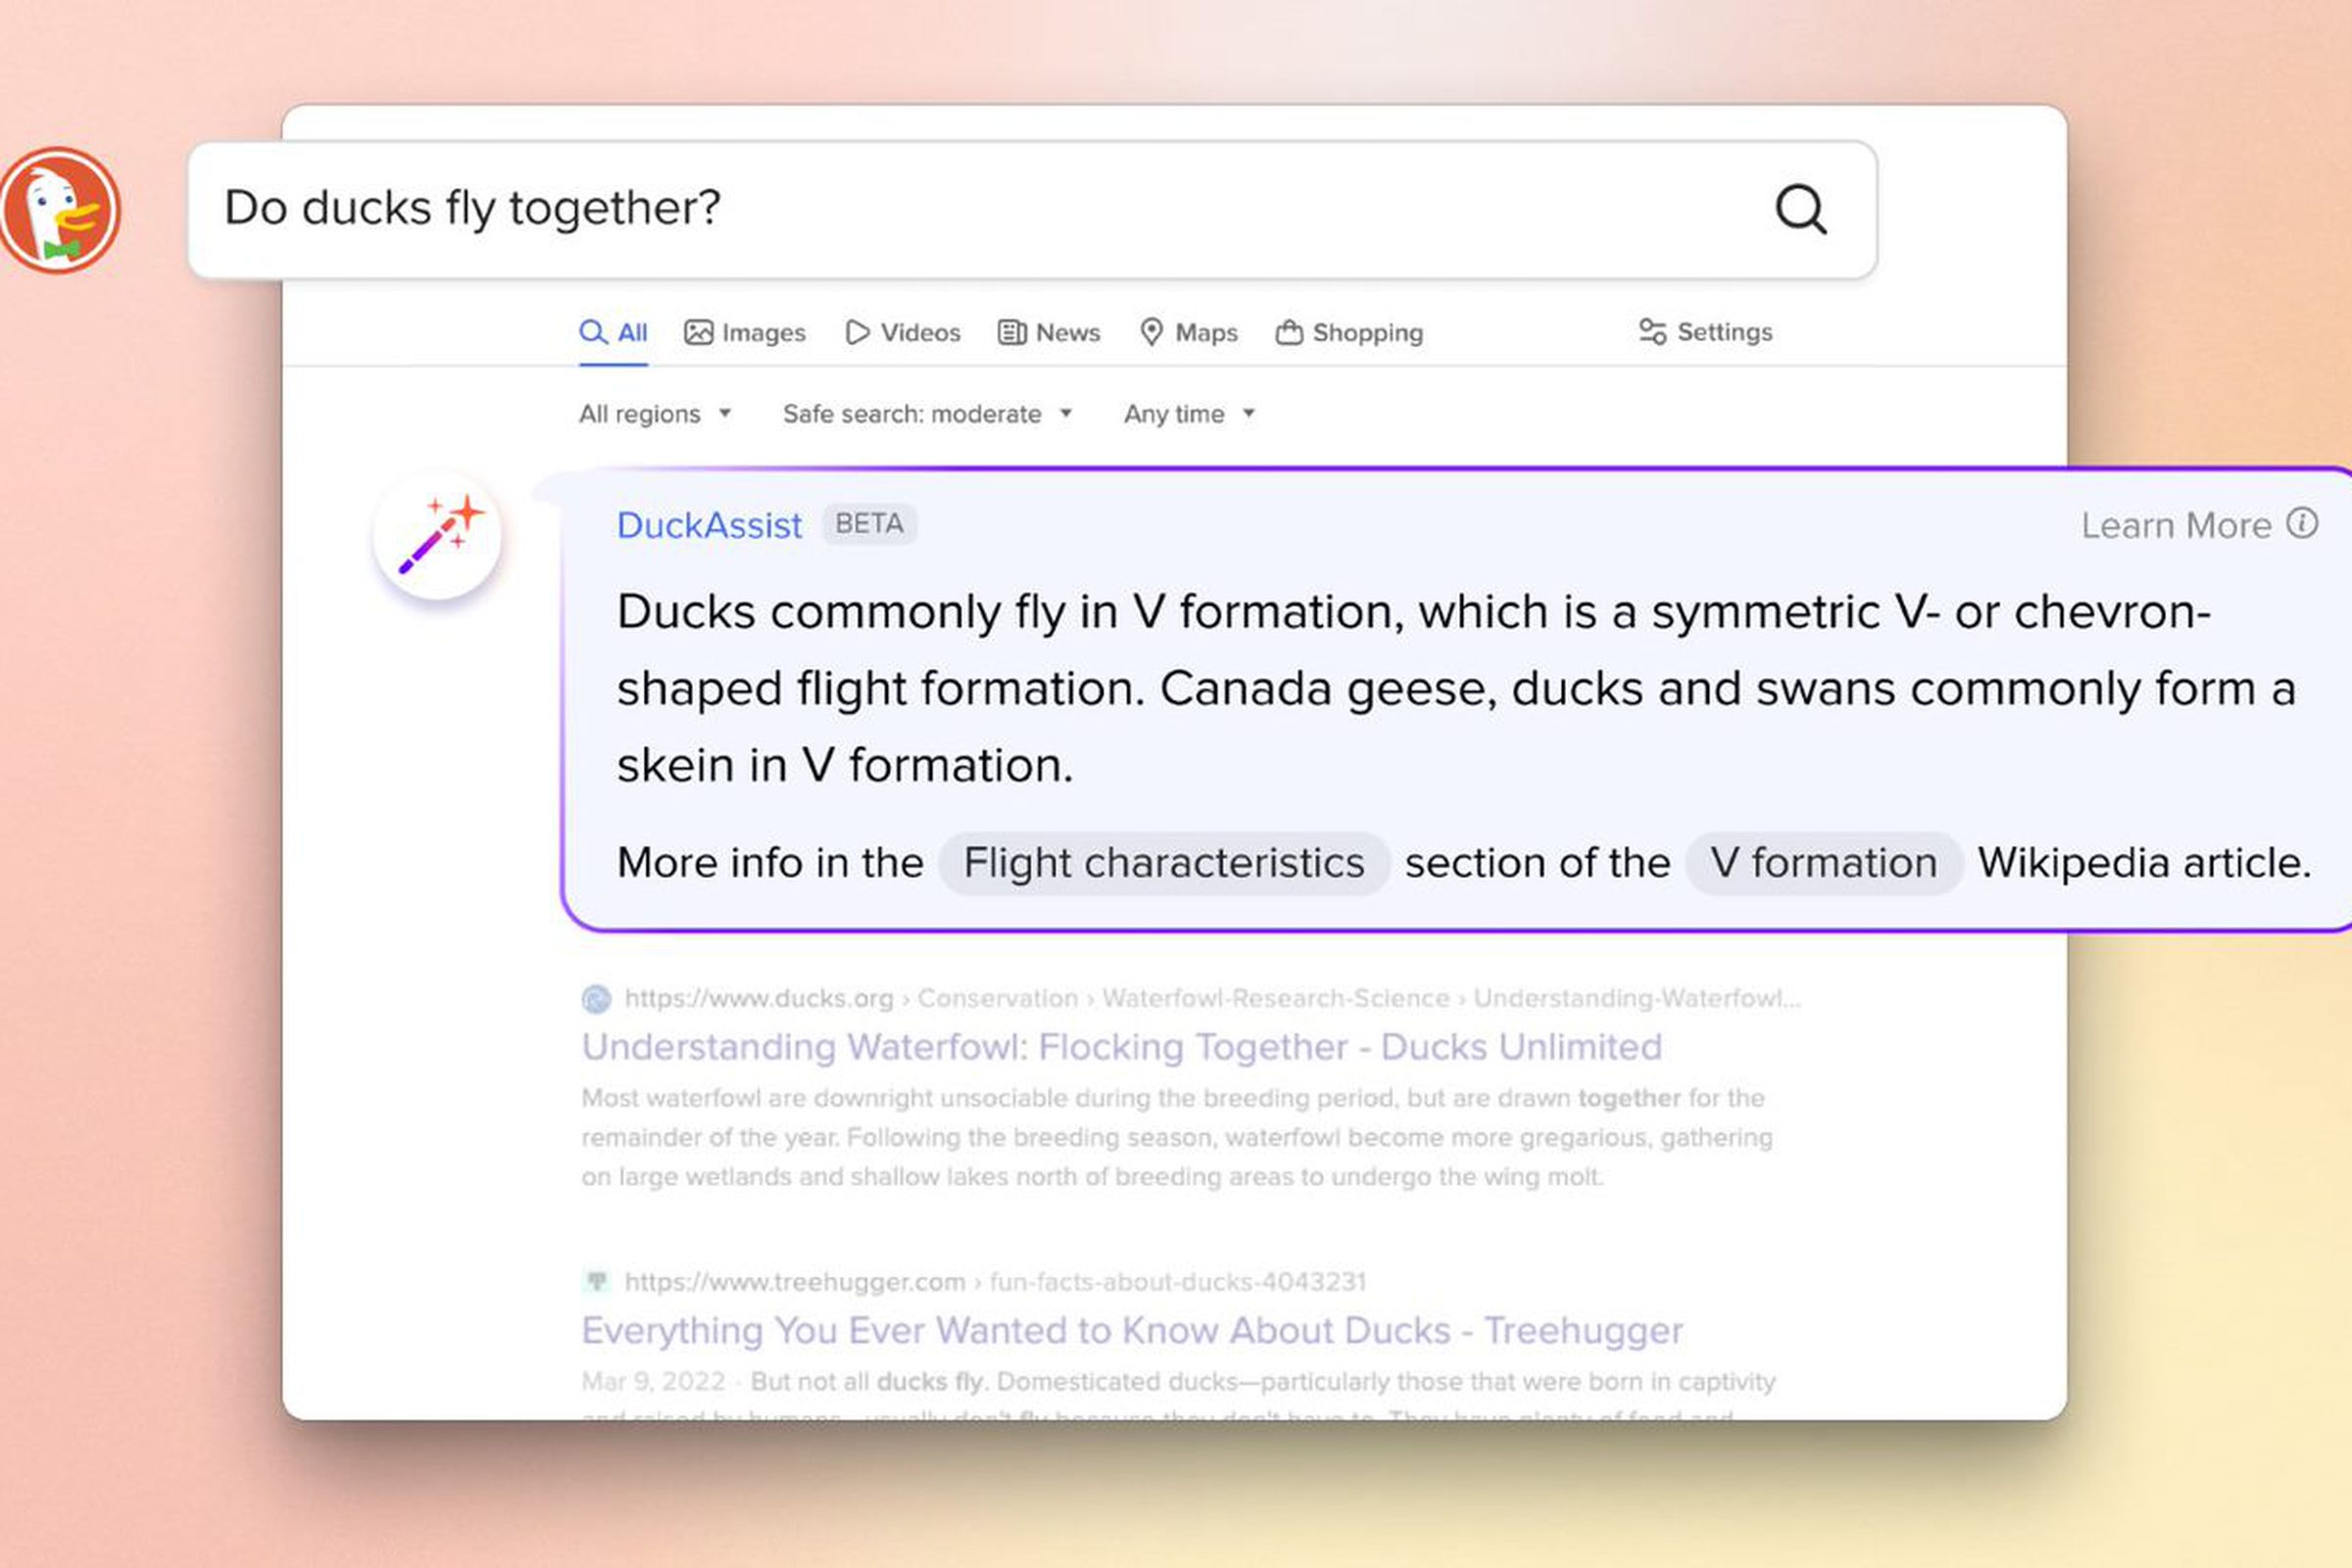 An image showing someone searching “Do ducks fly together?” in DuckDuckGo with an answer from DuckAssist